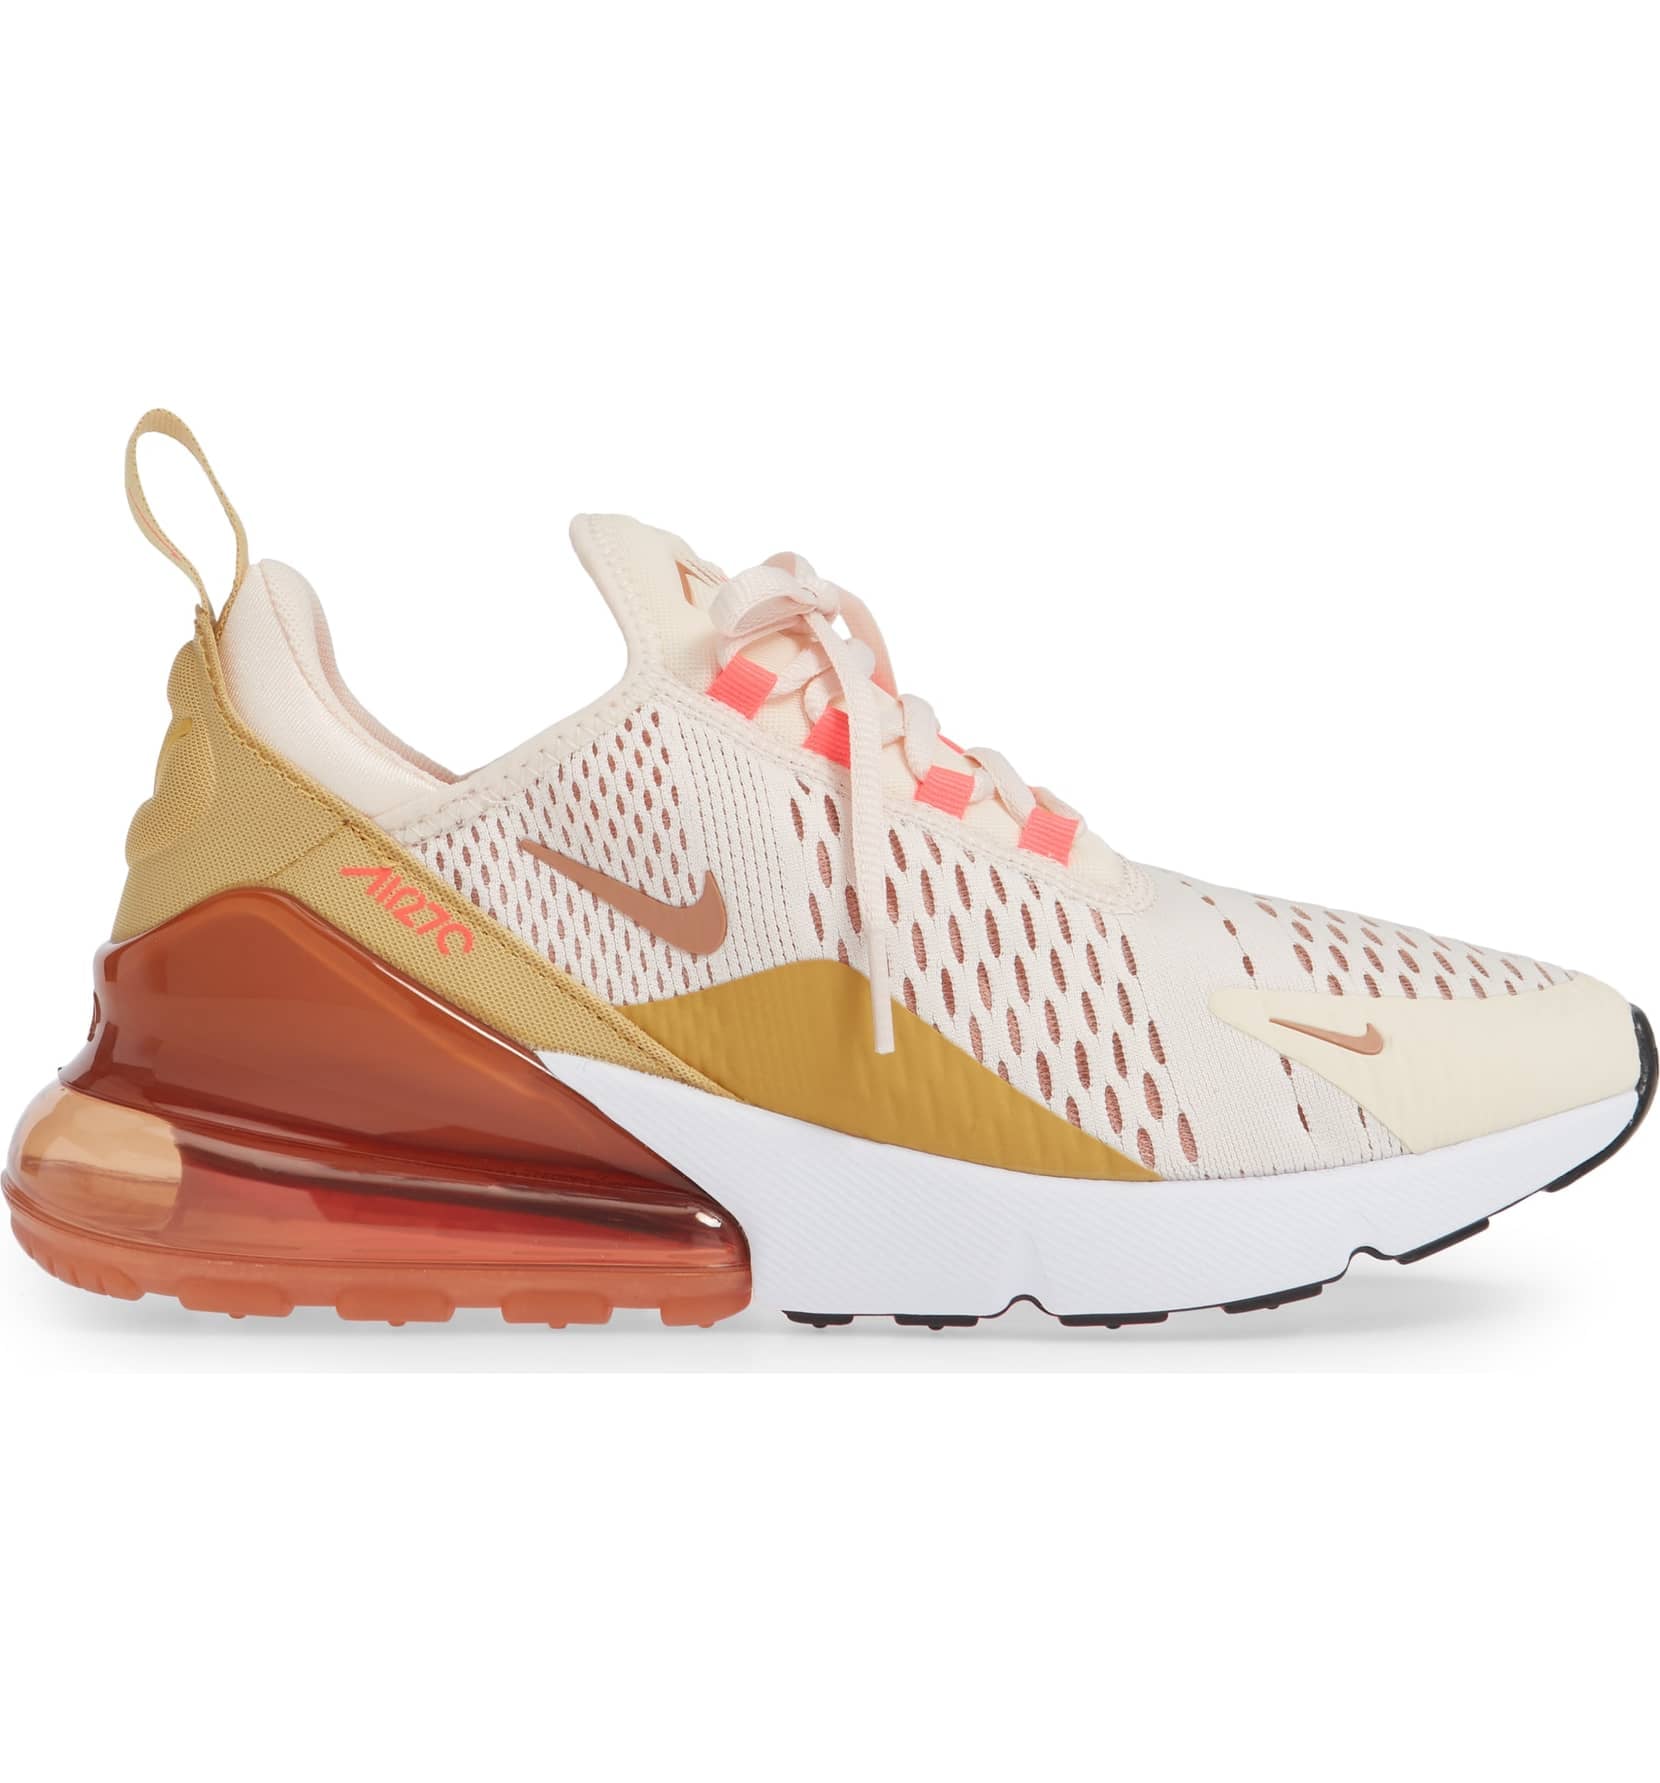 air max 270 good for working out